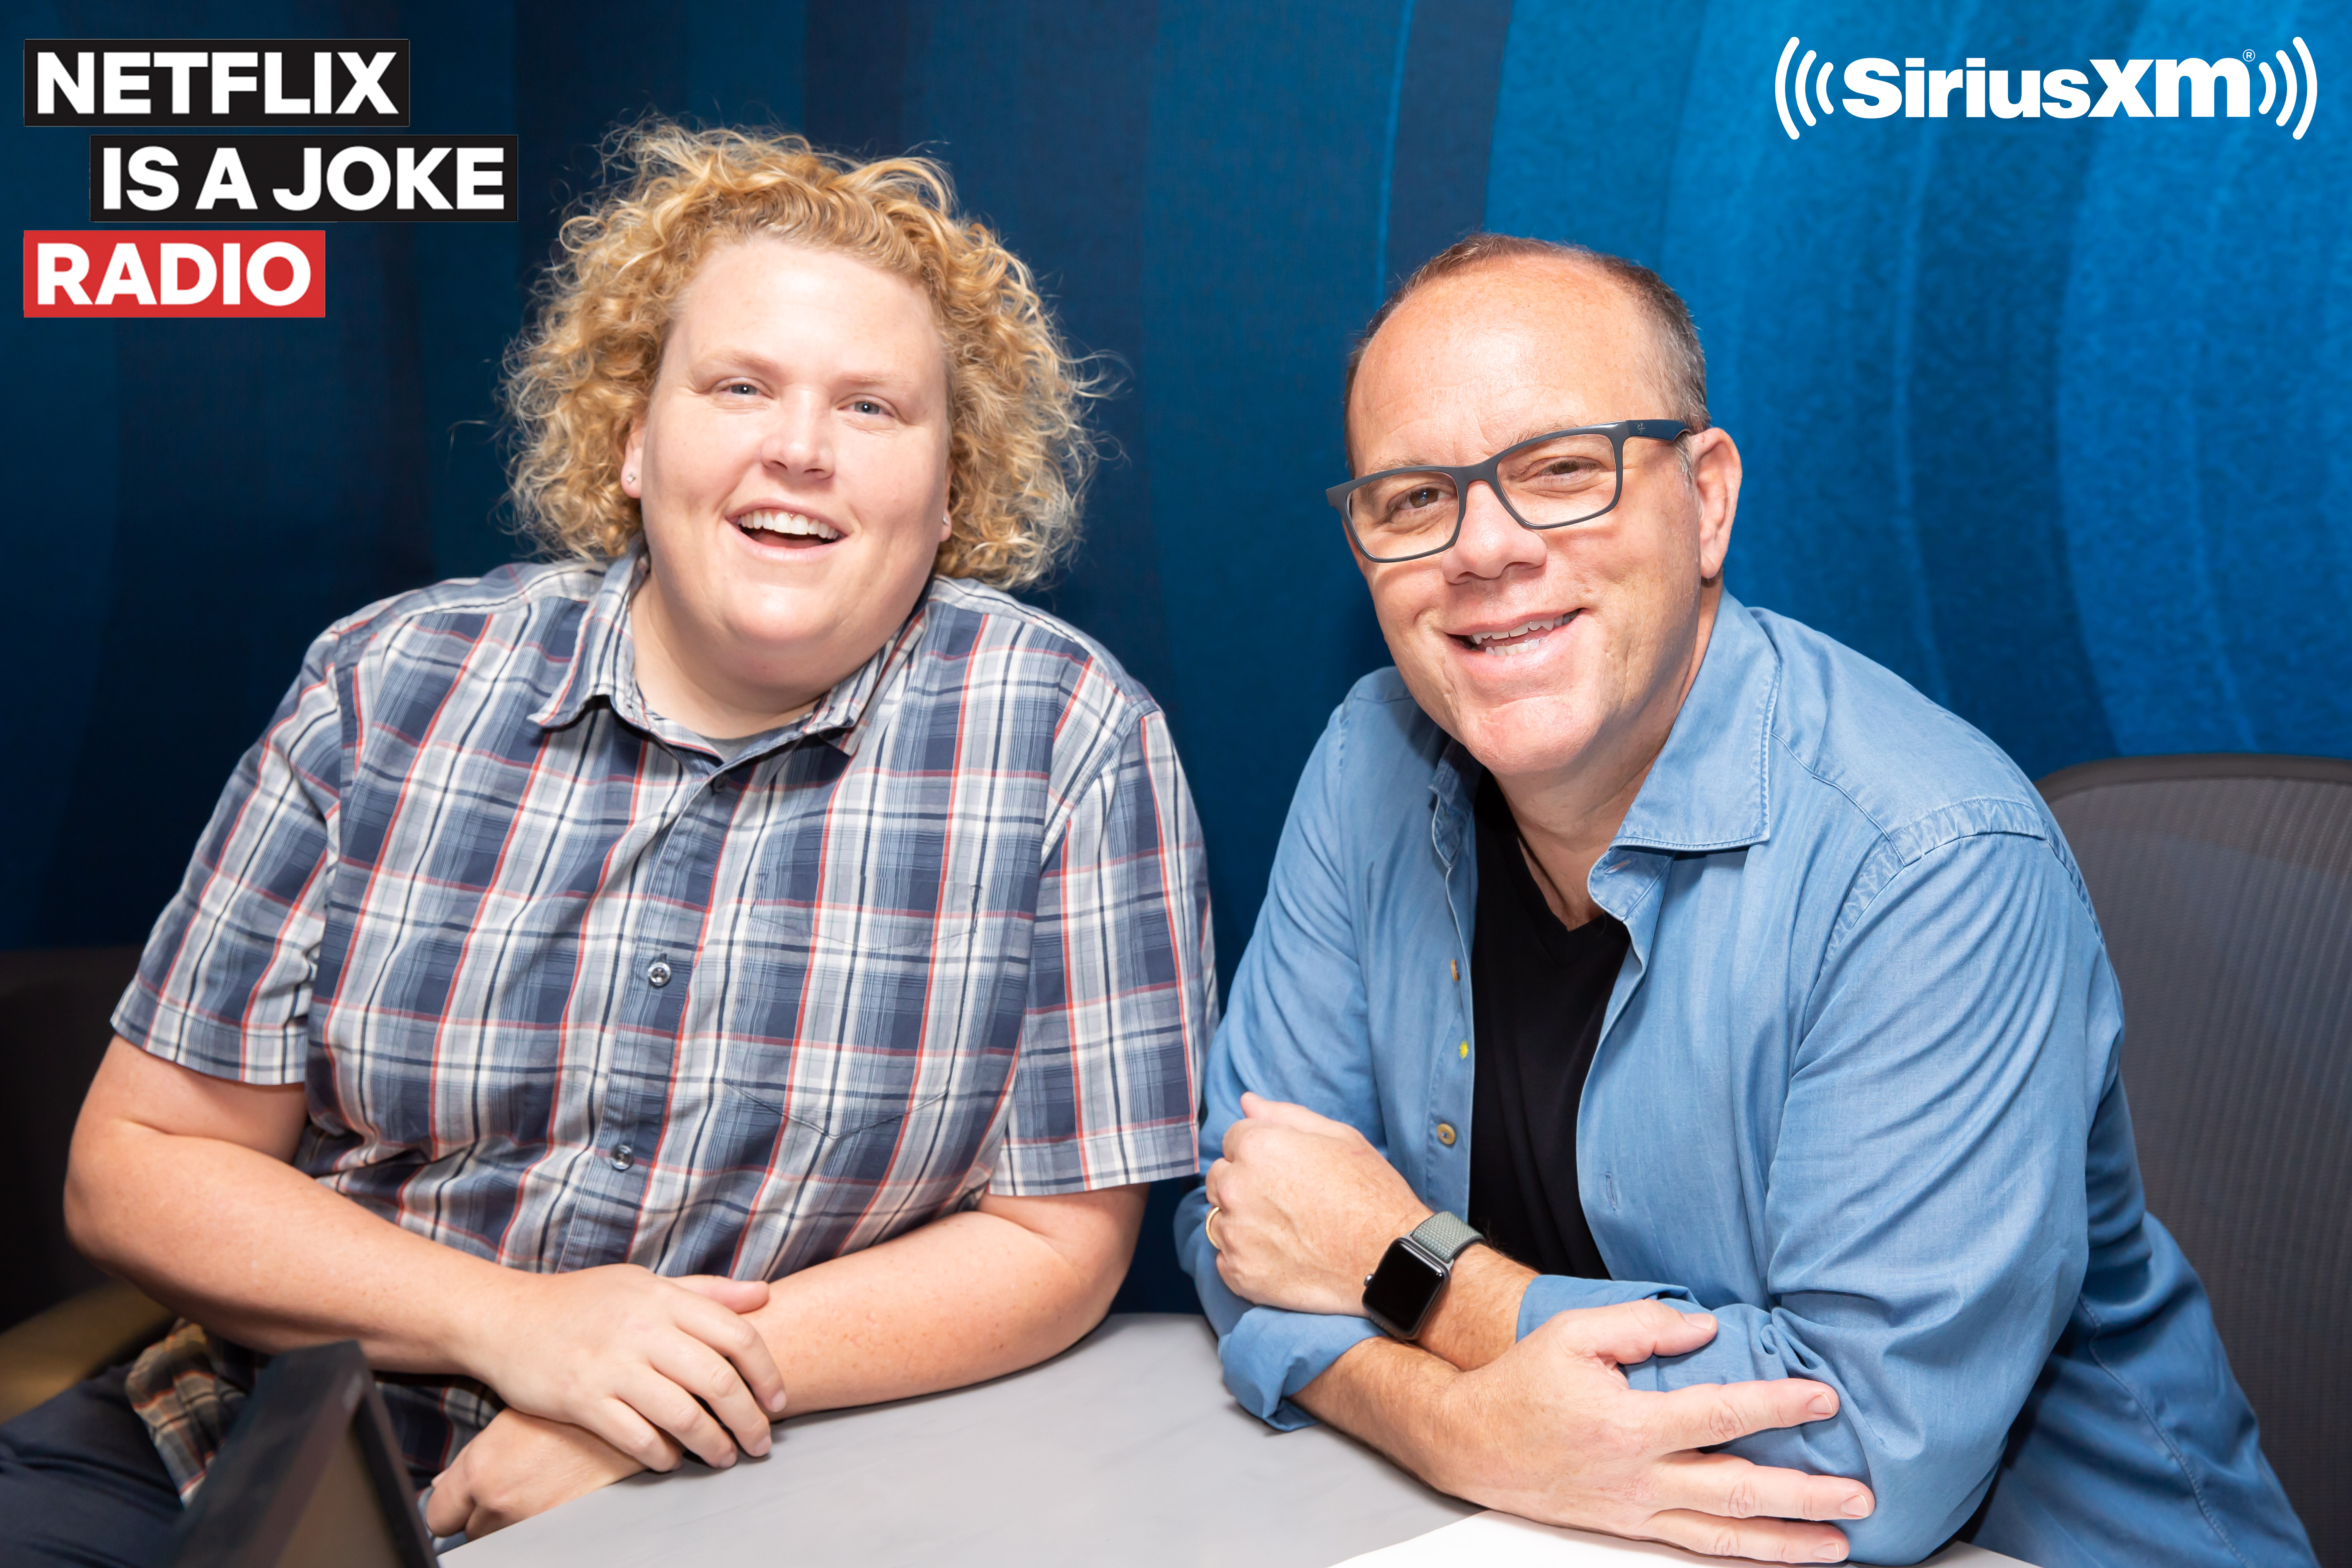 Fortune Feimster and Tom Papa to anchor weekday morning show for Netflix’s new SiriusXM radio channel